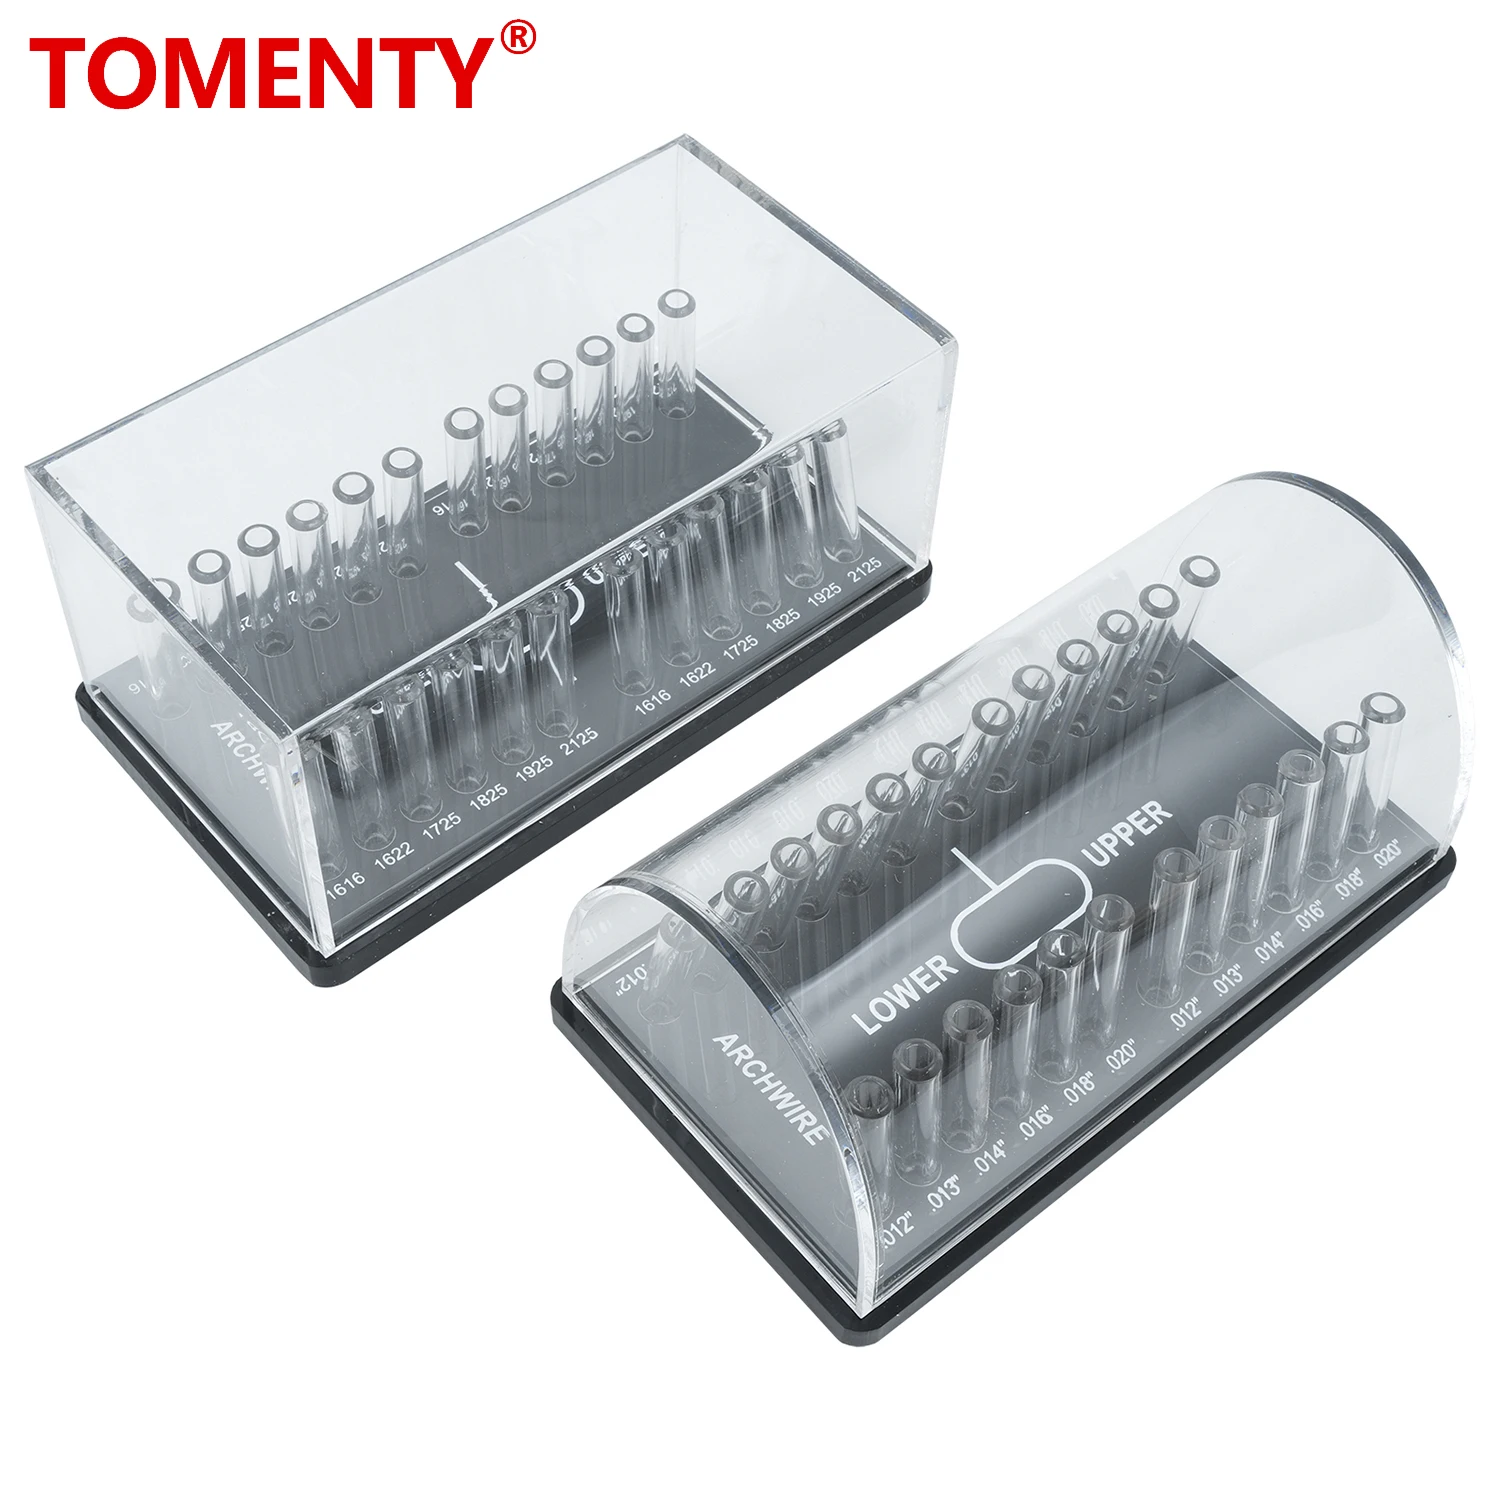 

Dental Orthodontic Archwire Placement Box Acrylic Organizer Holder Round/Rectangular Archwires Case Dispenser Dentistry Tools